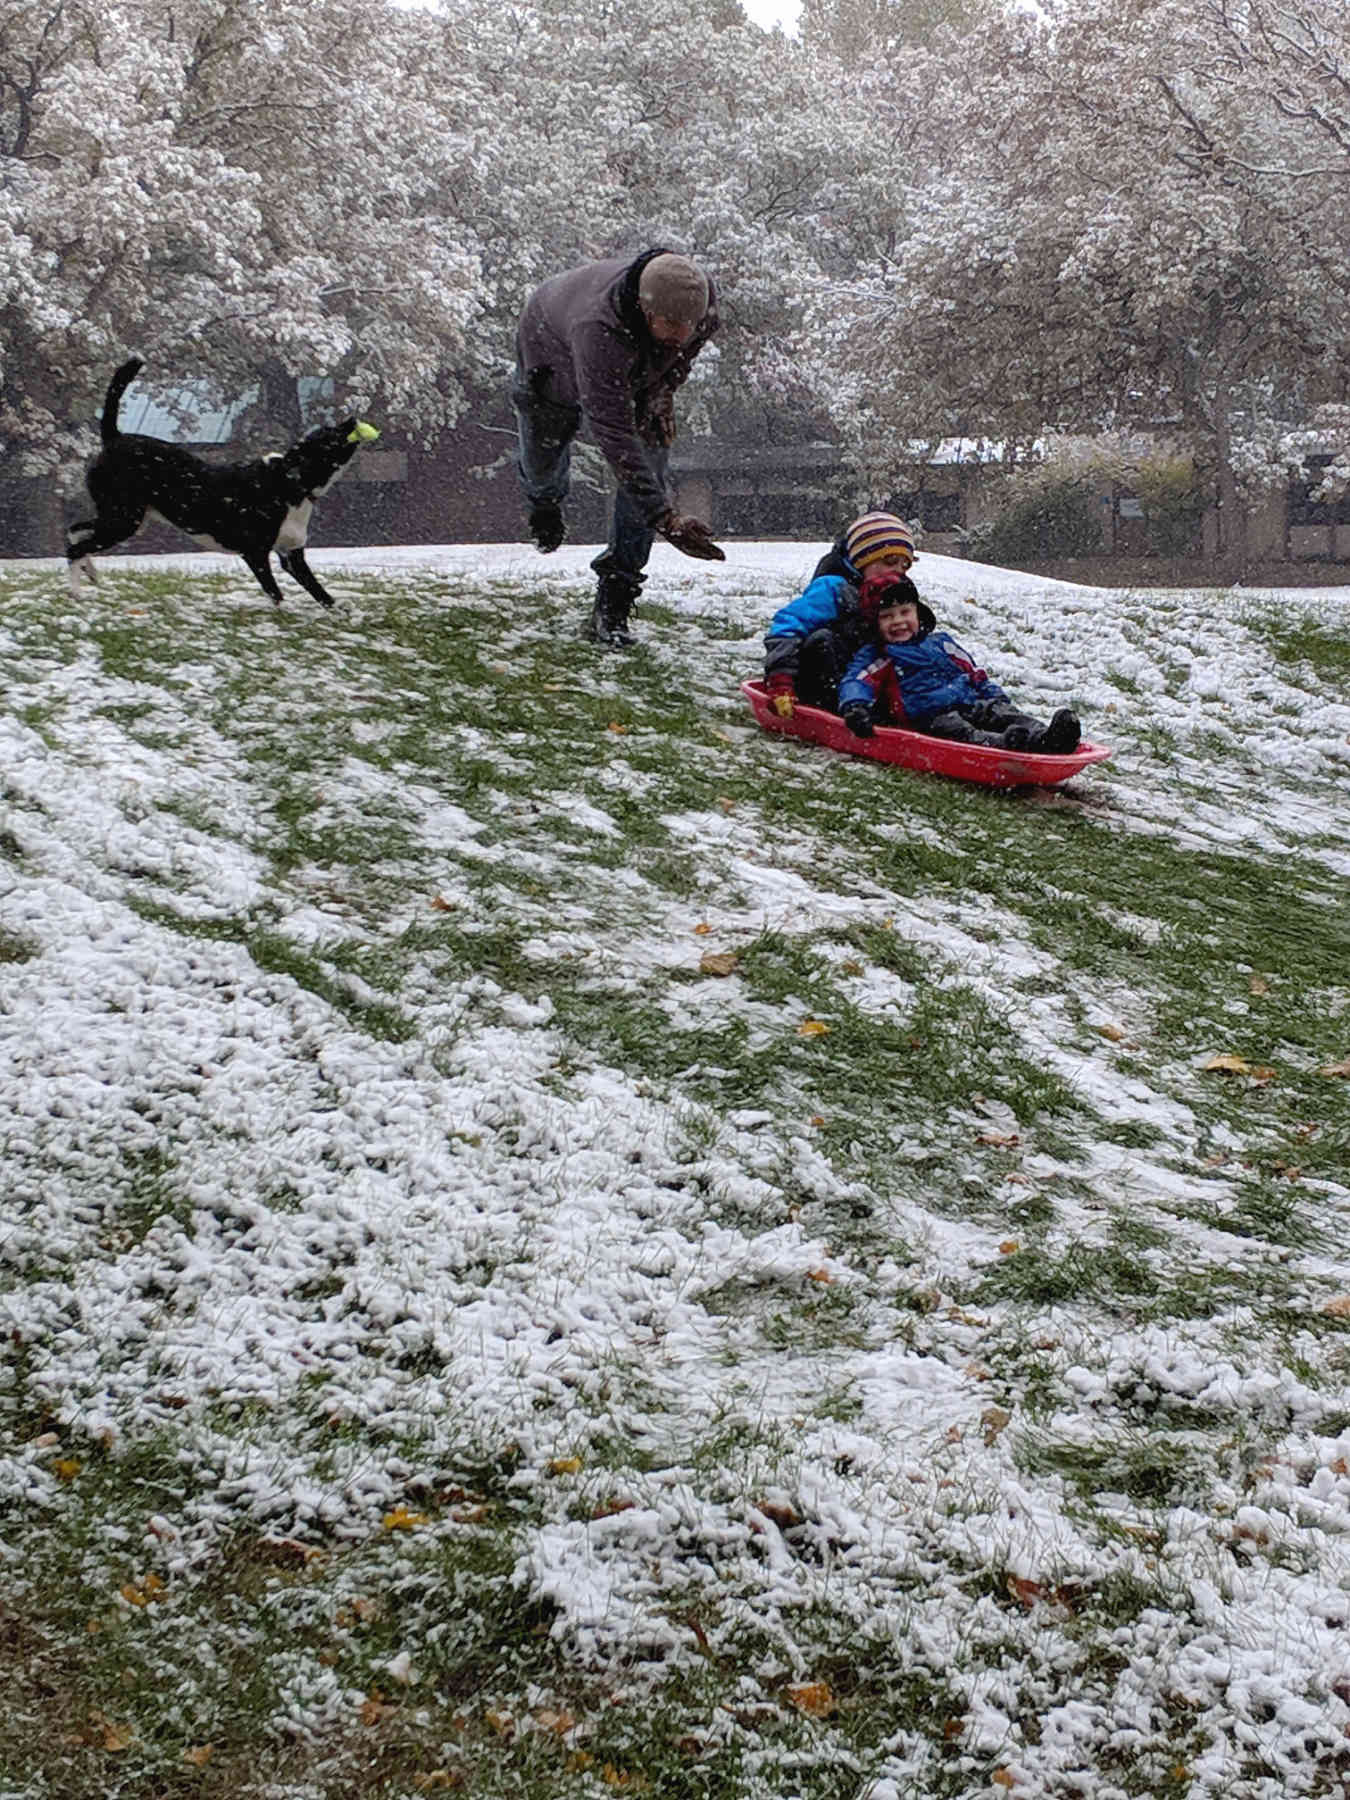 kids sledding down hill in front of man and dog